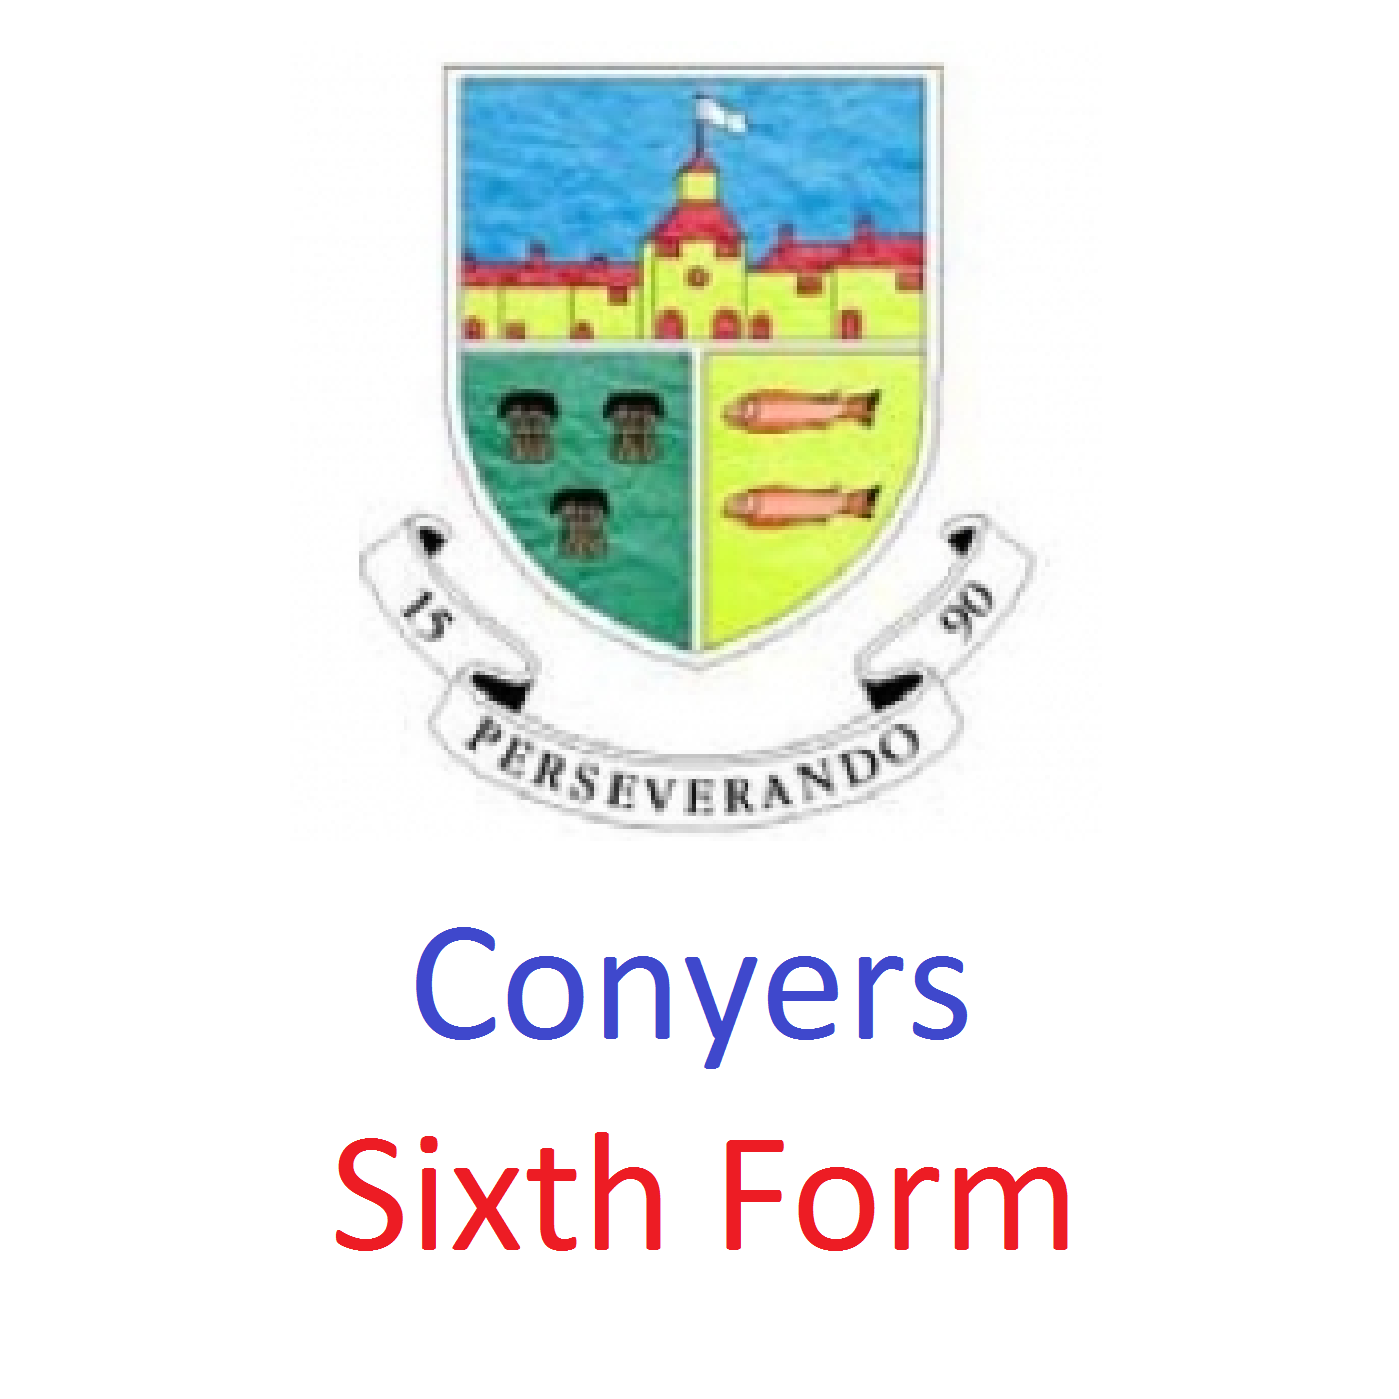 Official Twitter Page for Conyers Sixth Form. Students follow for quick updates and information!